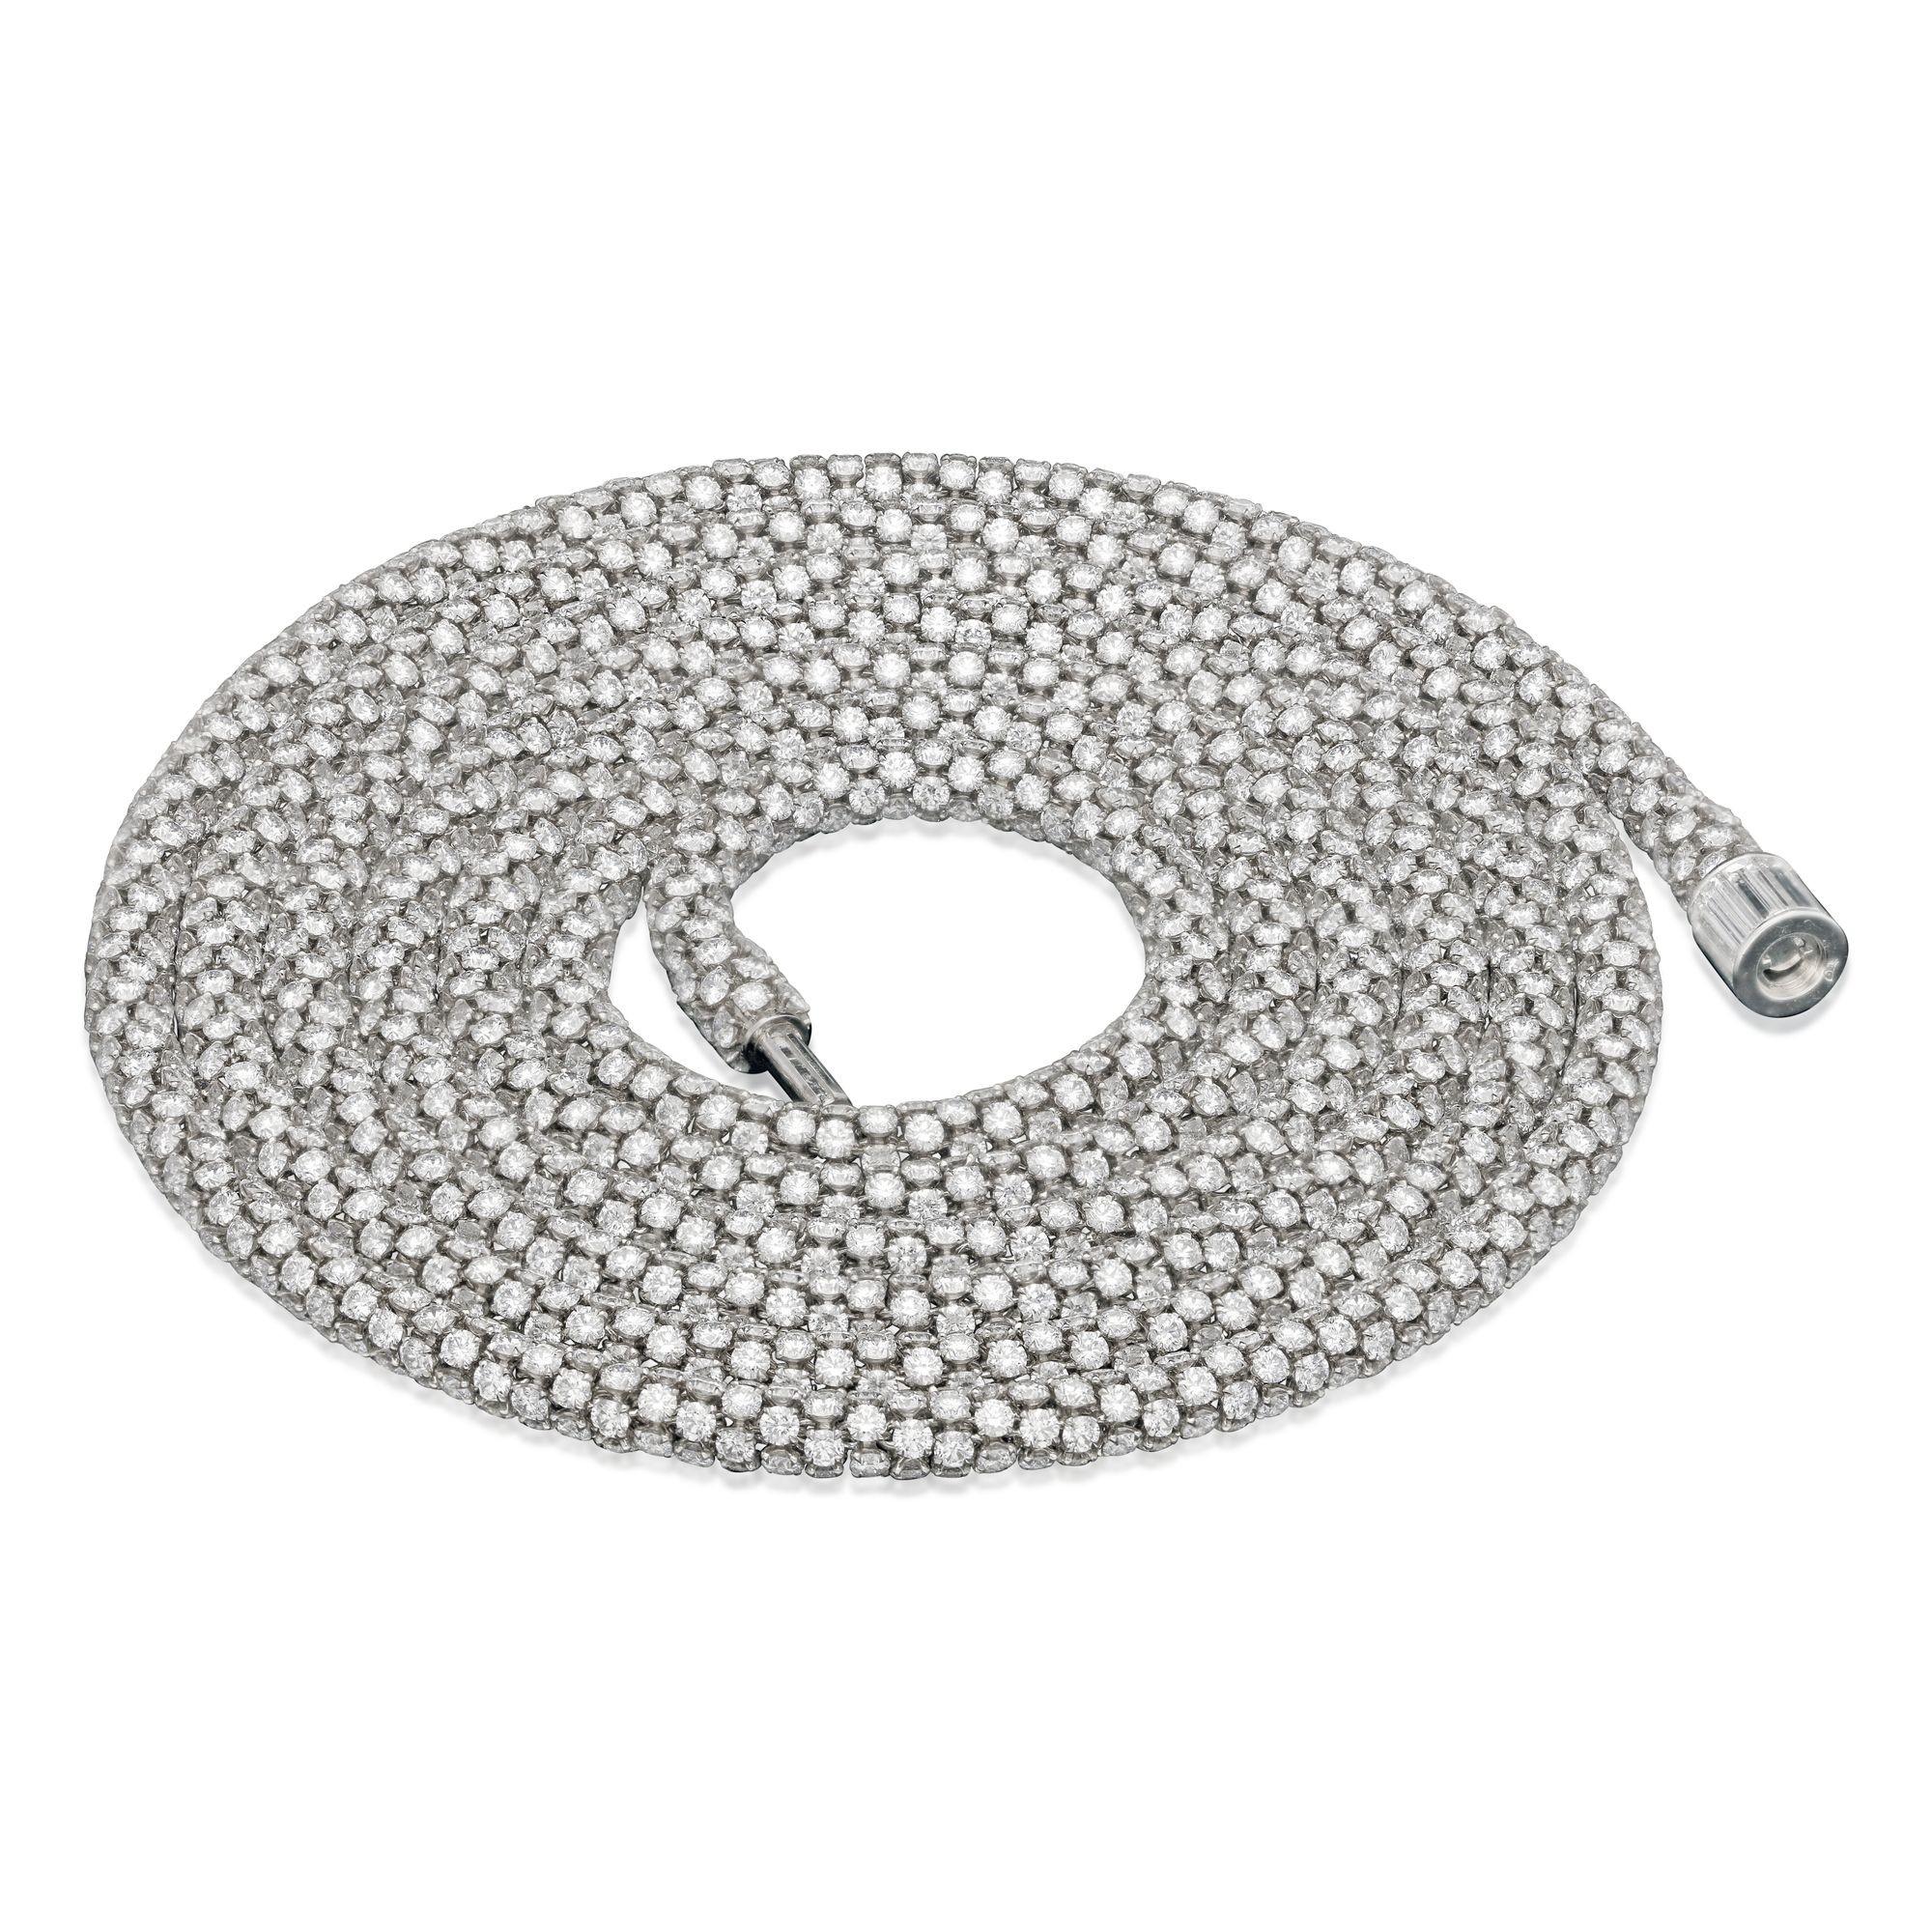 A beautiful diamond and platinum necklace by Hancocks, the highly articulated and wonderfully flexible necklace formed of many uniform rondelle shaped links each set in the round with five round brilliant cut diamonds and each rondelle each closely